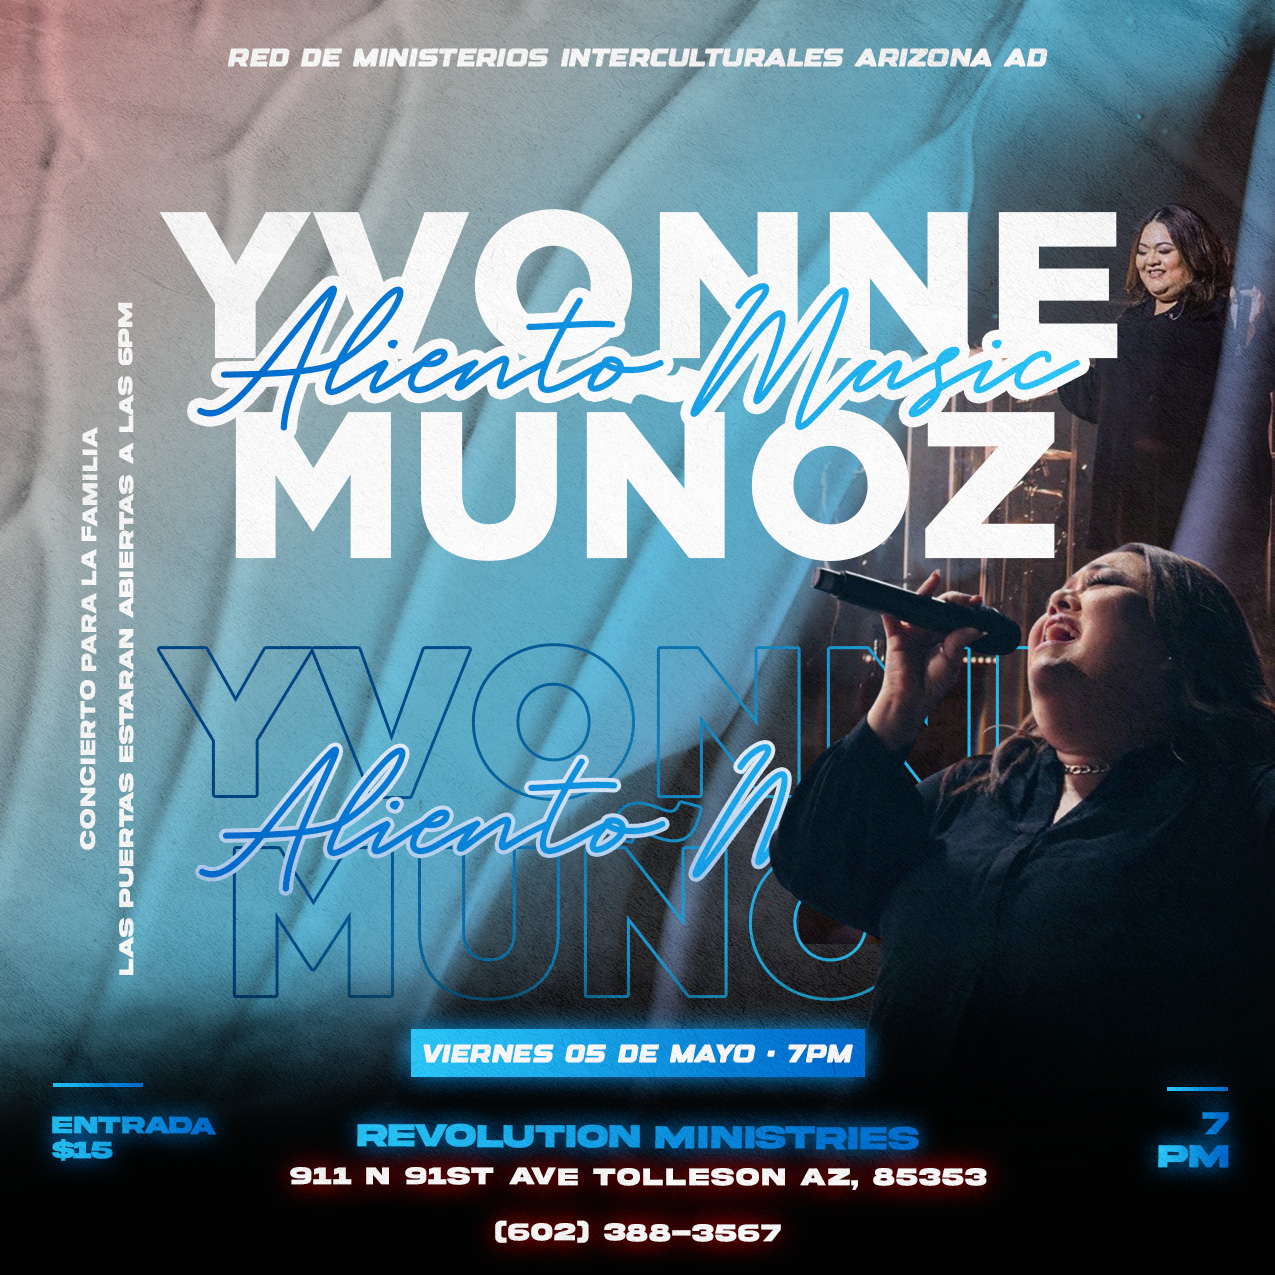 Concert with Yvonne Munoz, Encounter with God - Concierto con Yvonne Munoz, Encuentro con Dios